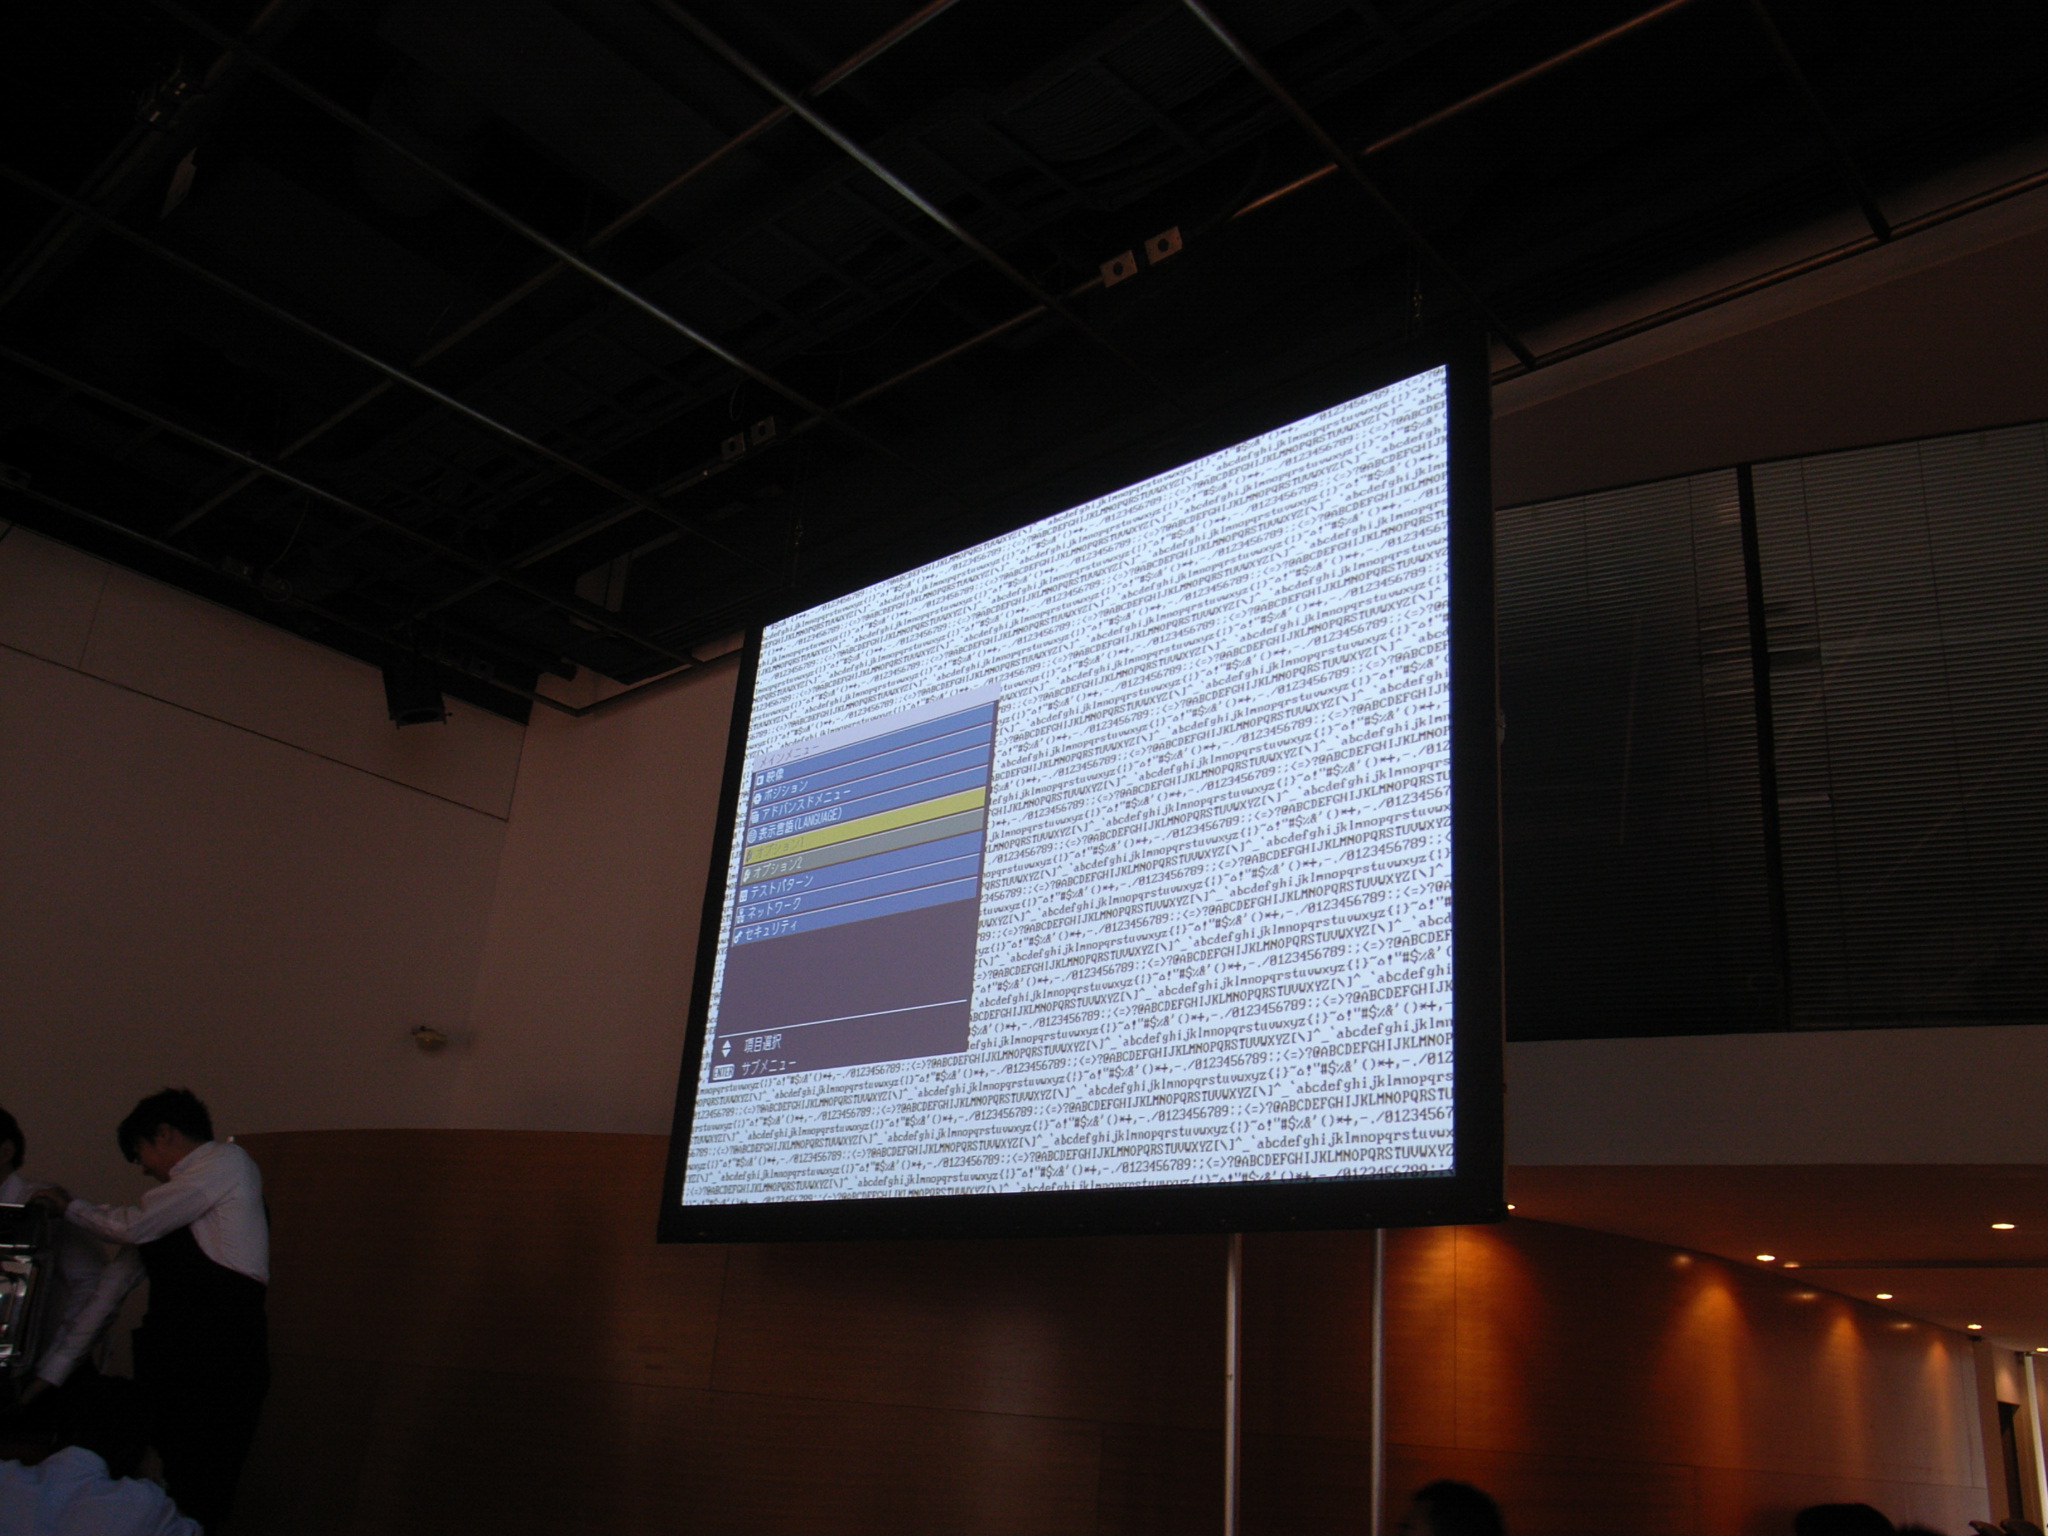 a large screen displays a text message